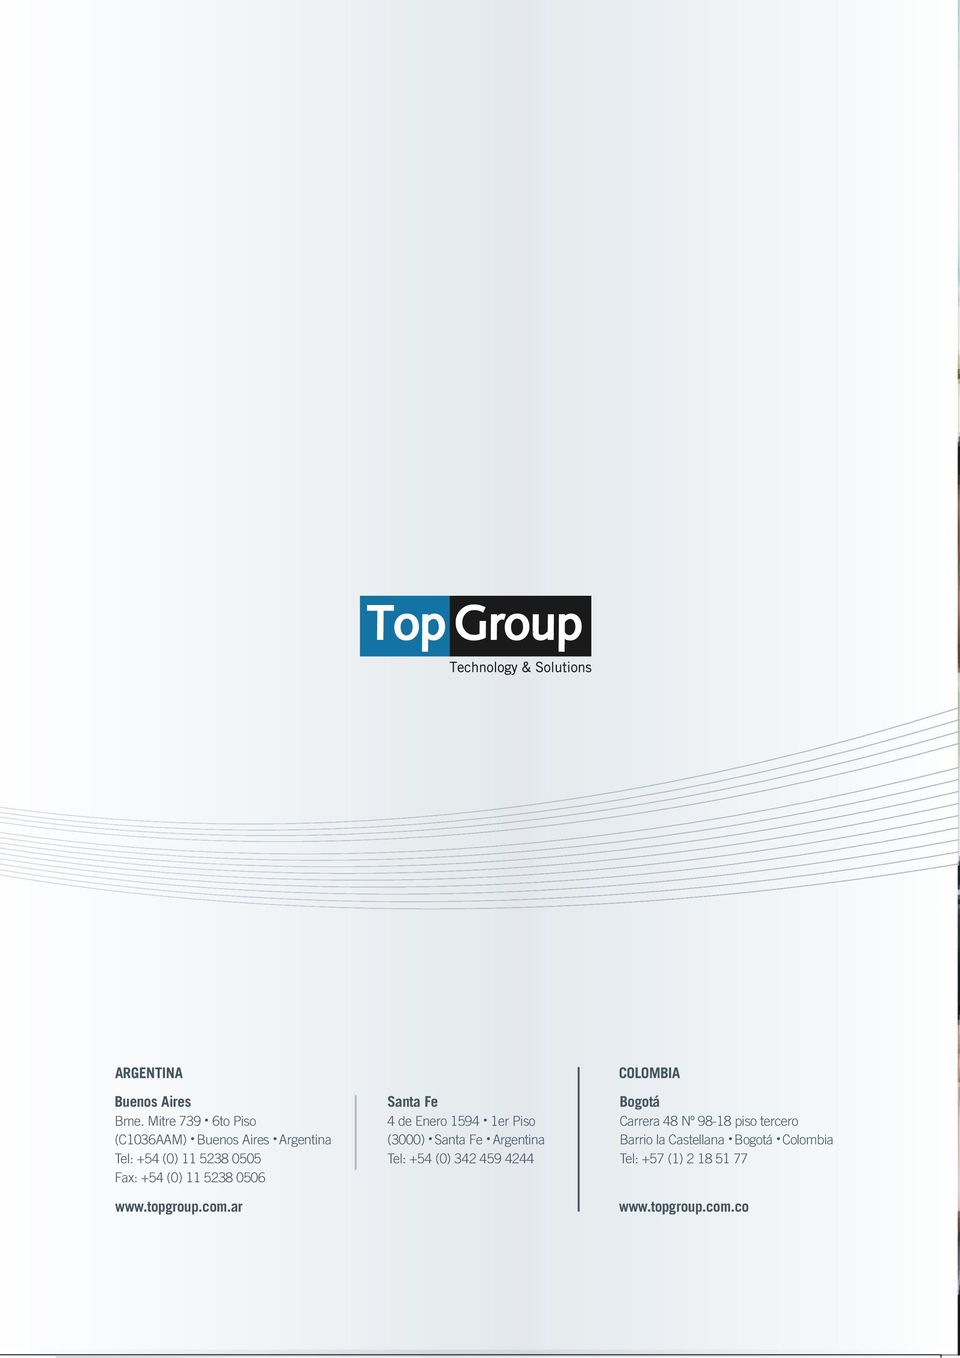 11 5238 0506 www.topgroup.com.